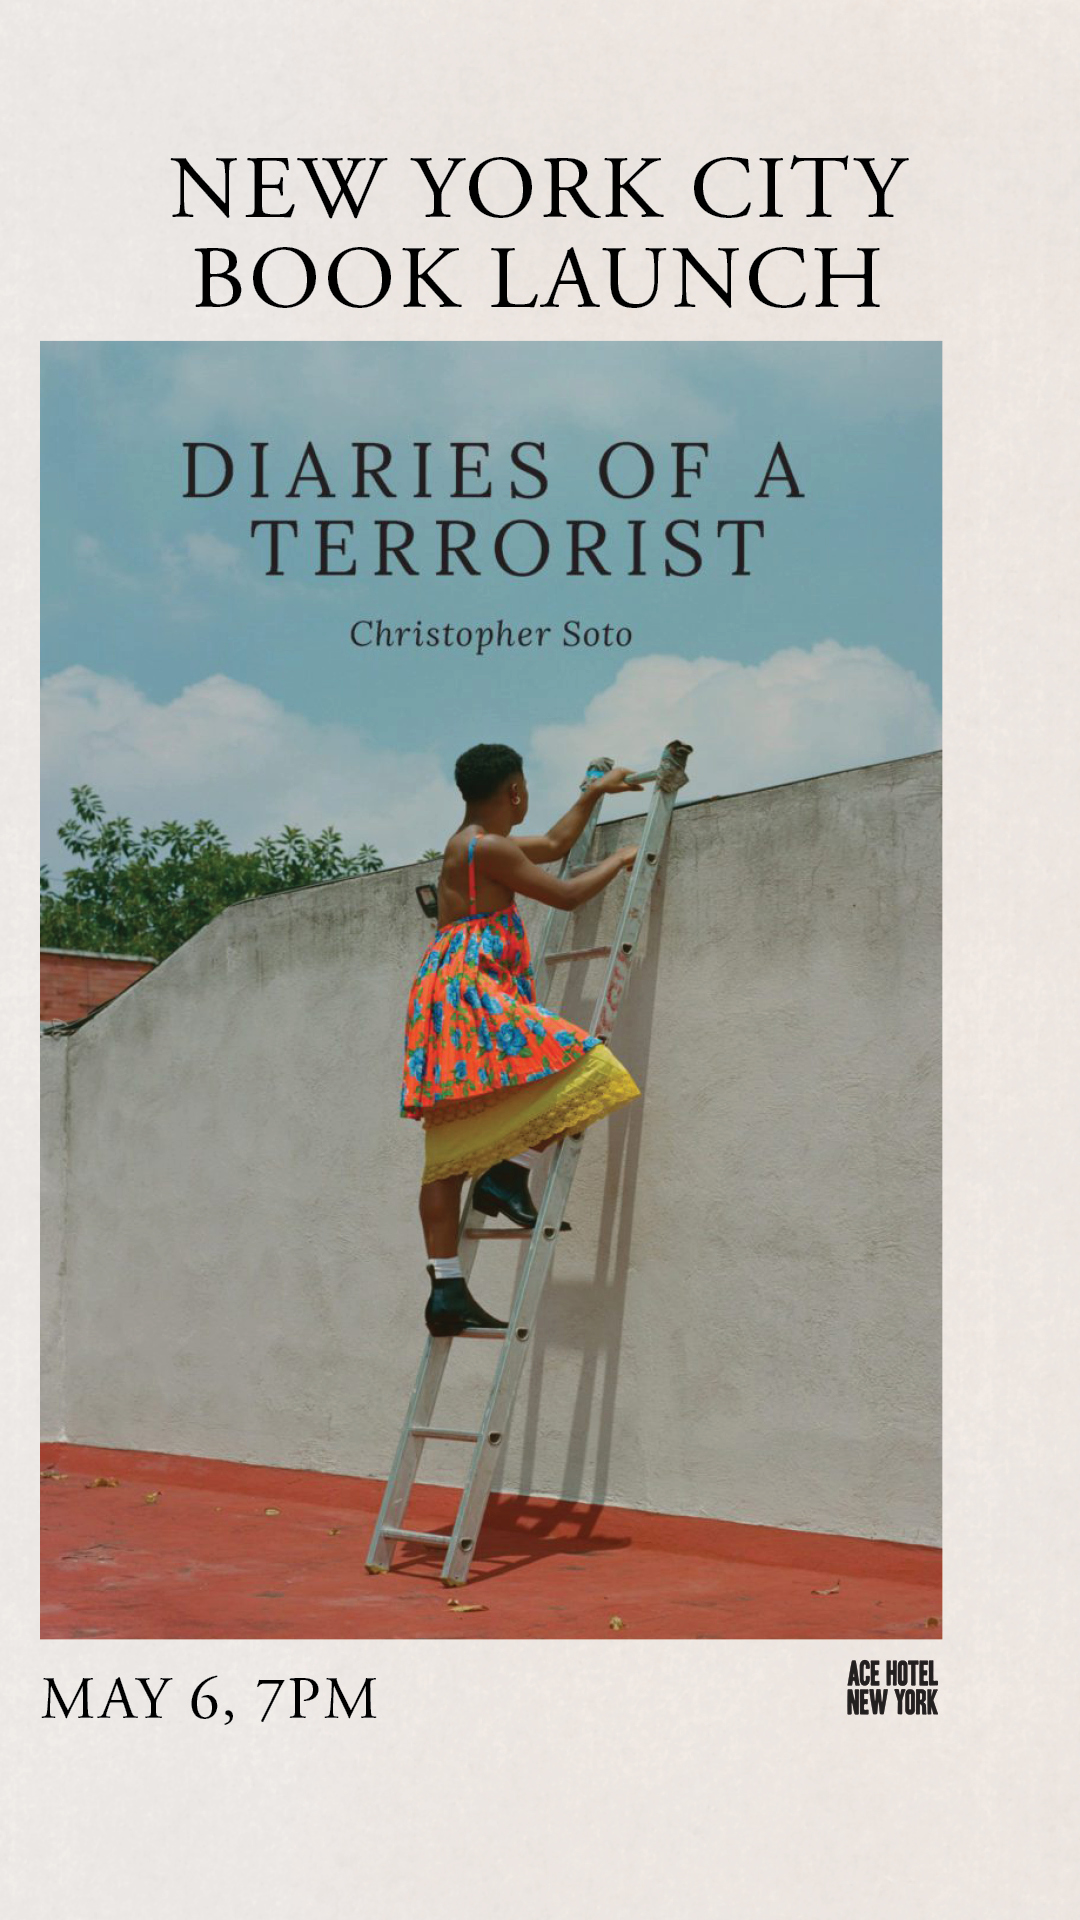 Diaries of a Terrorist - Christopher Soto’s debut poetry collection promo - May 6